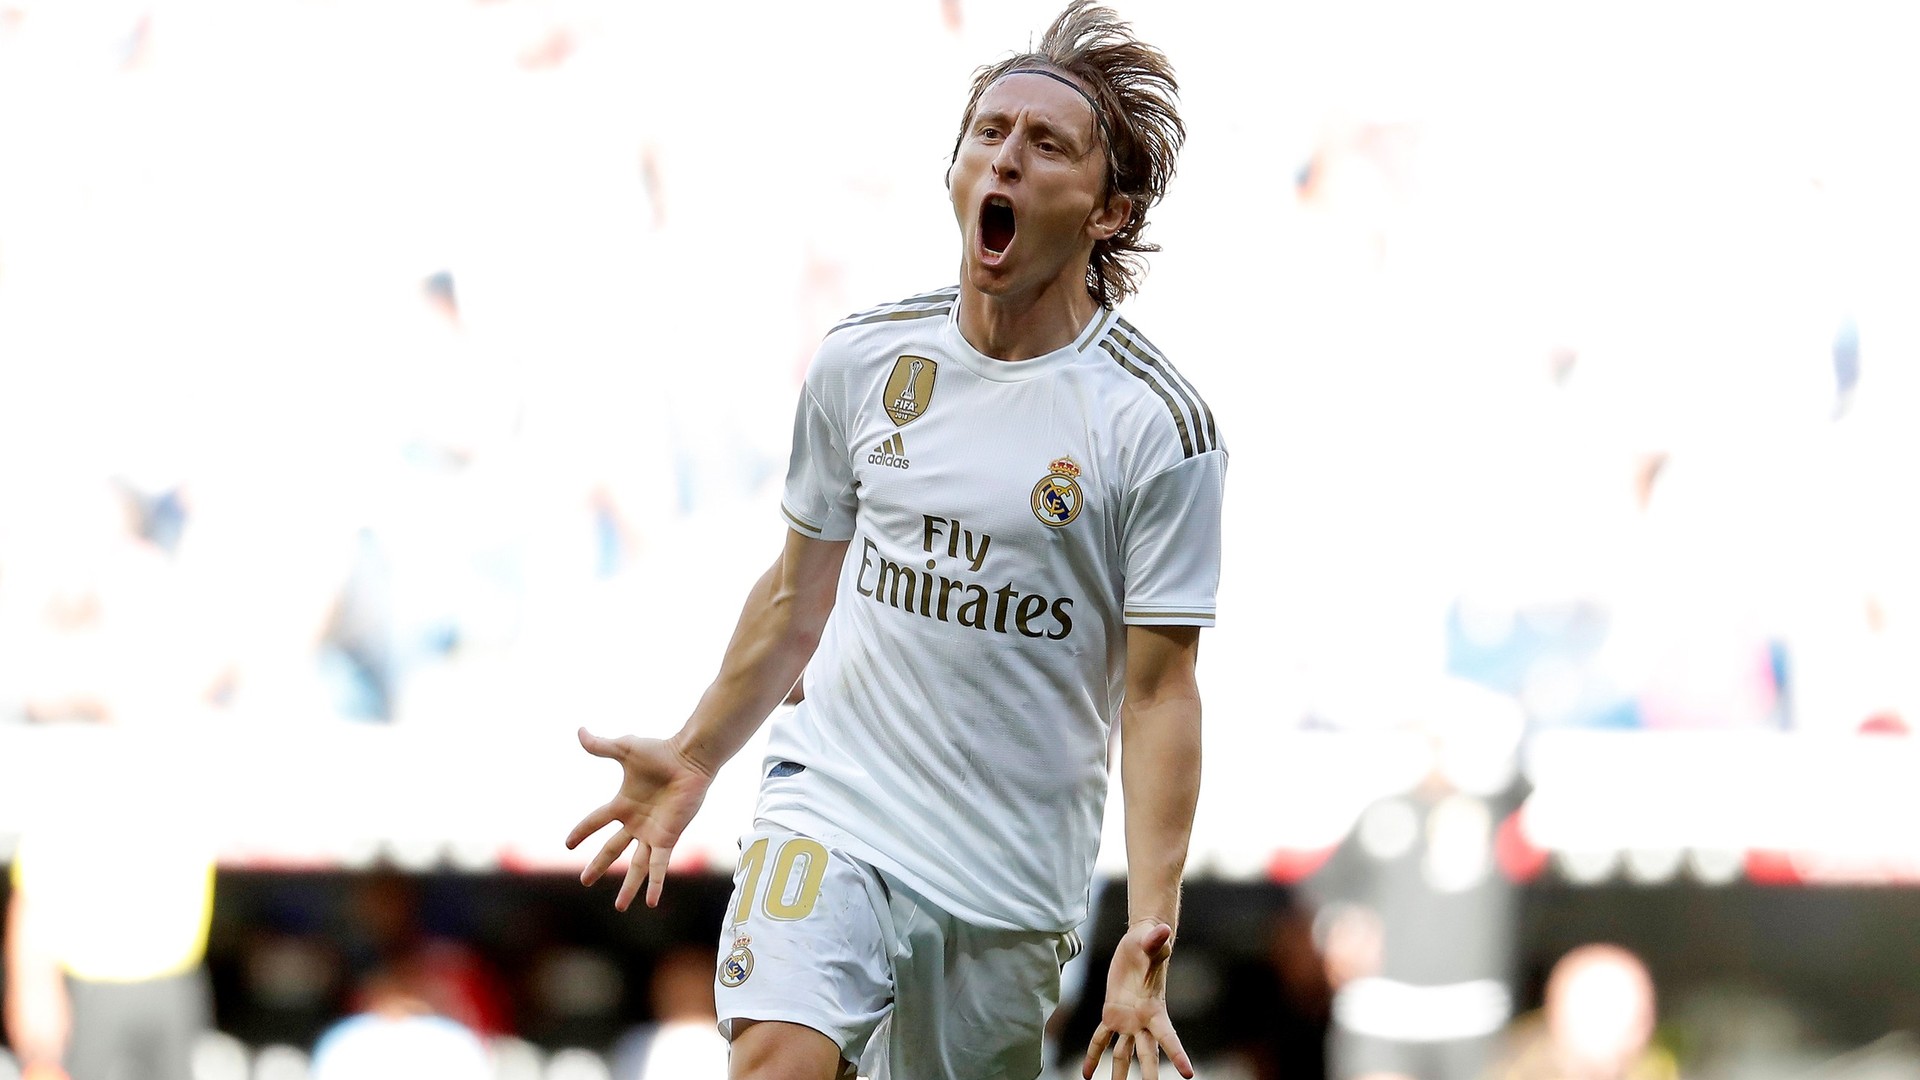 Download wallpapers luka modric real madrid for desktop free. High Quality  HD pictures wallpapers - Page 1